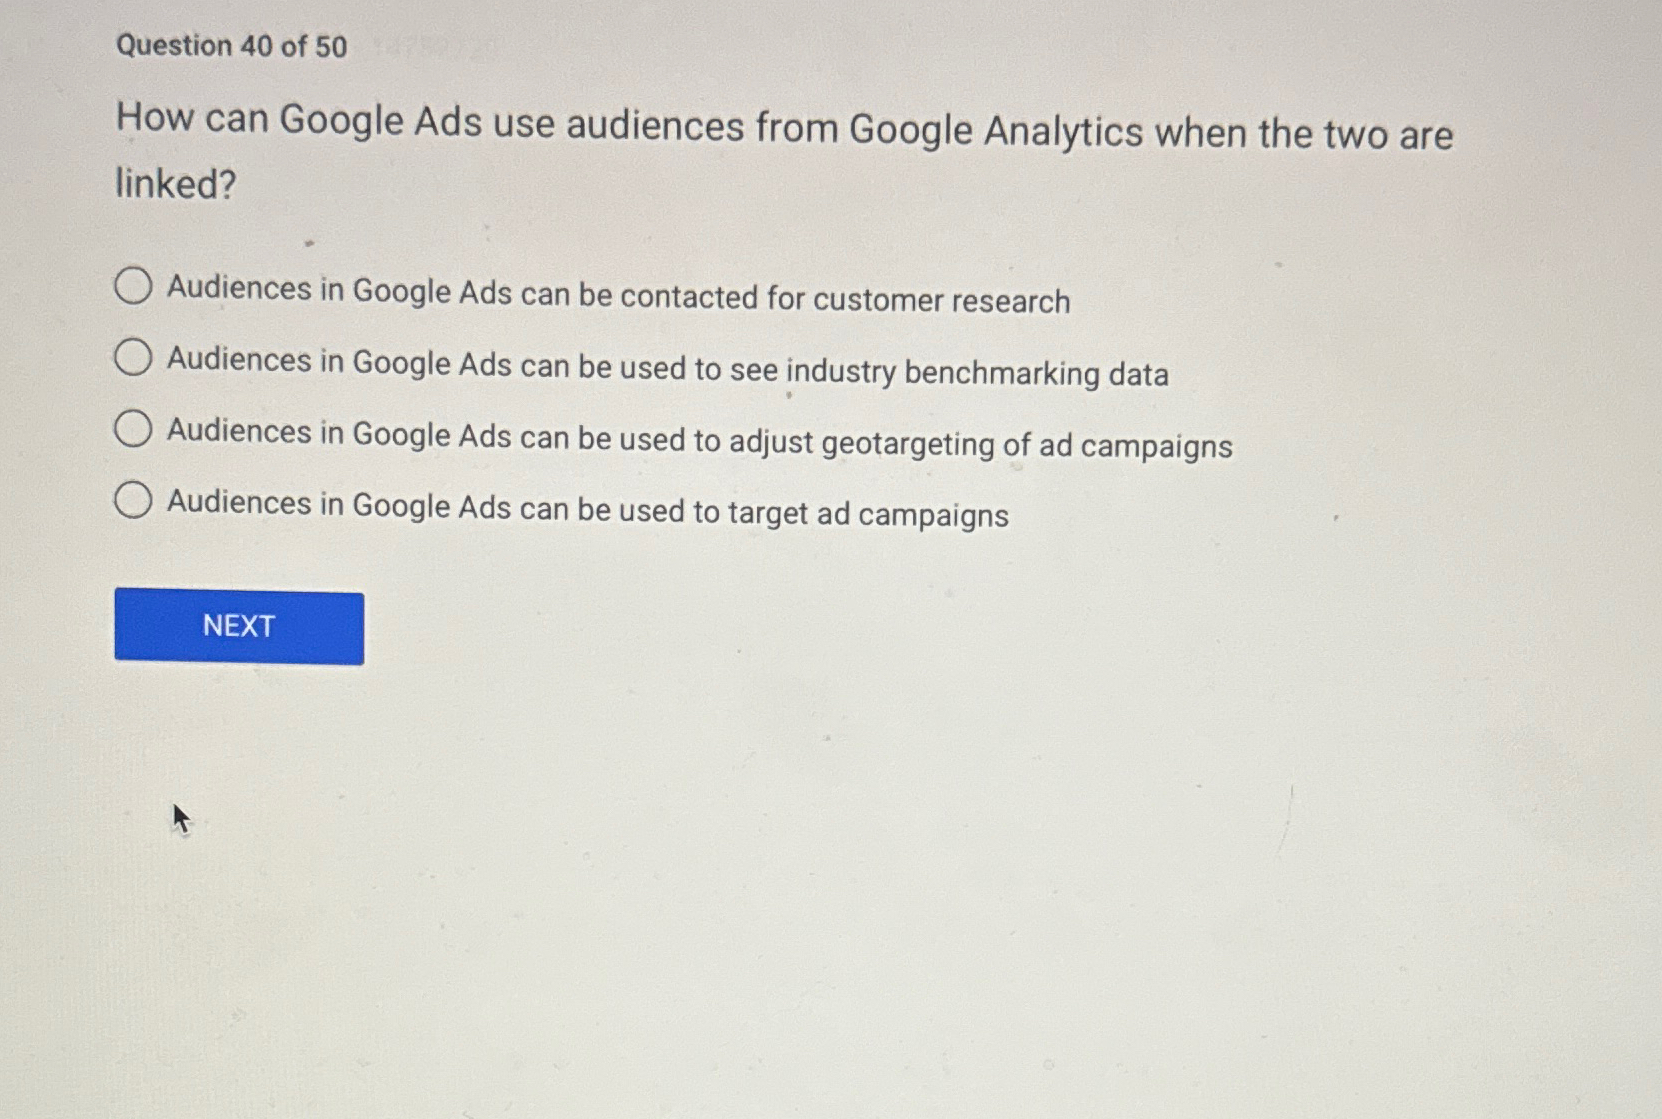 How Can Google Ads Use Audiences from Google Analytics When the Two are Linked?  